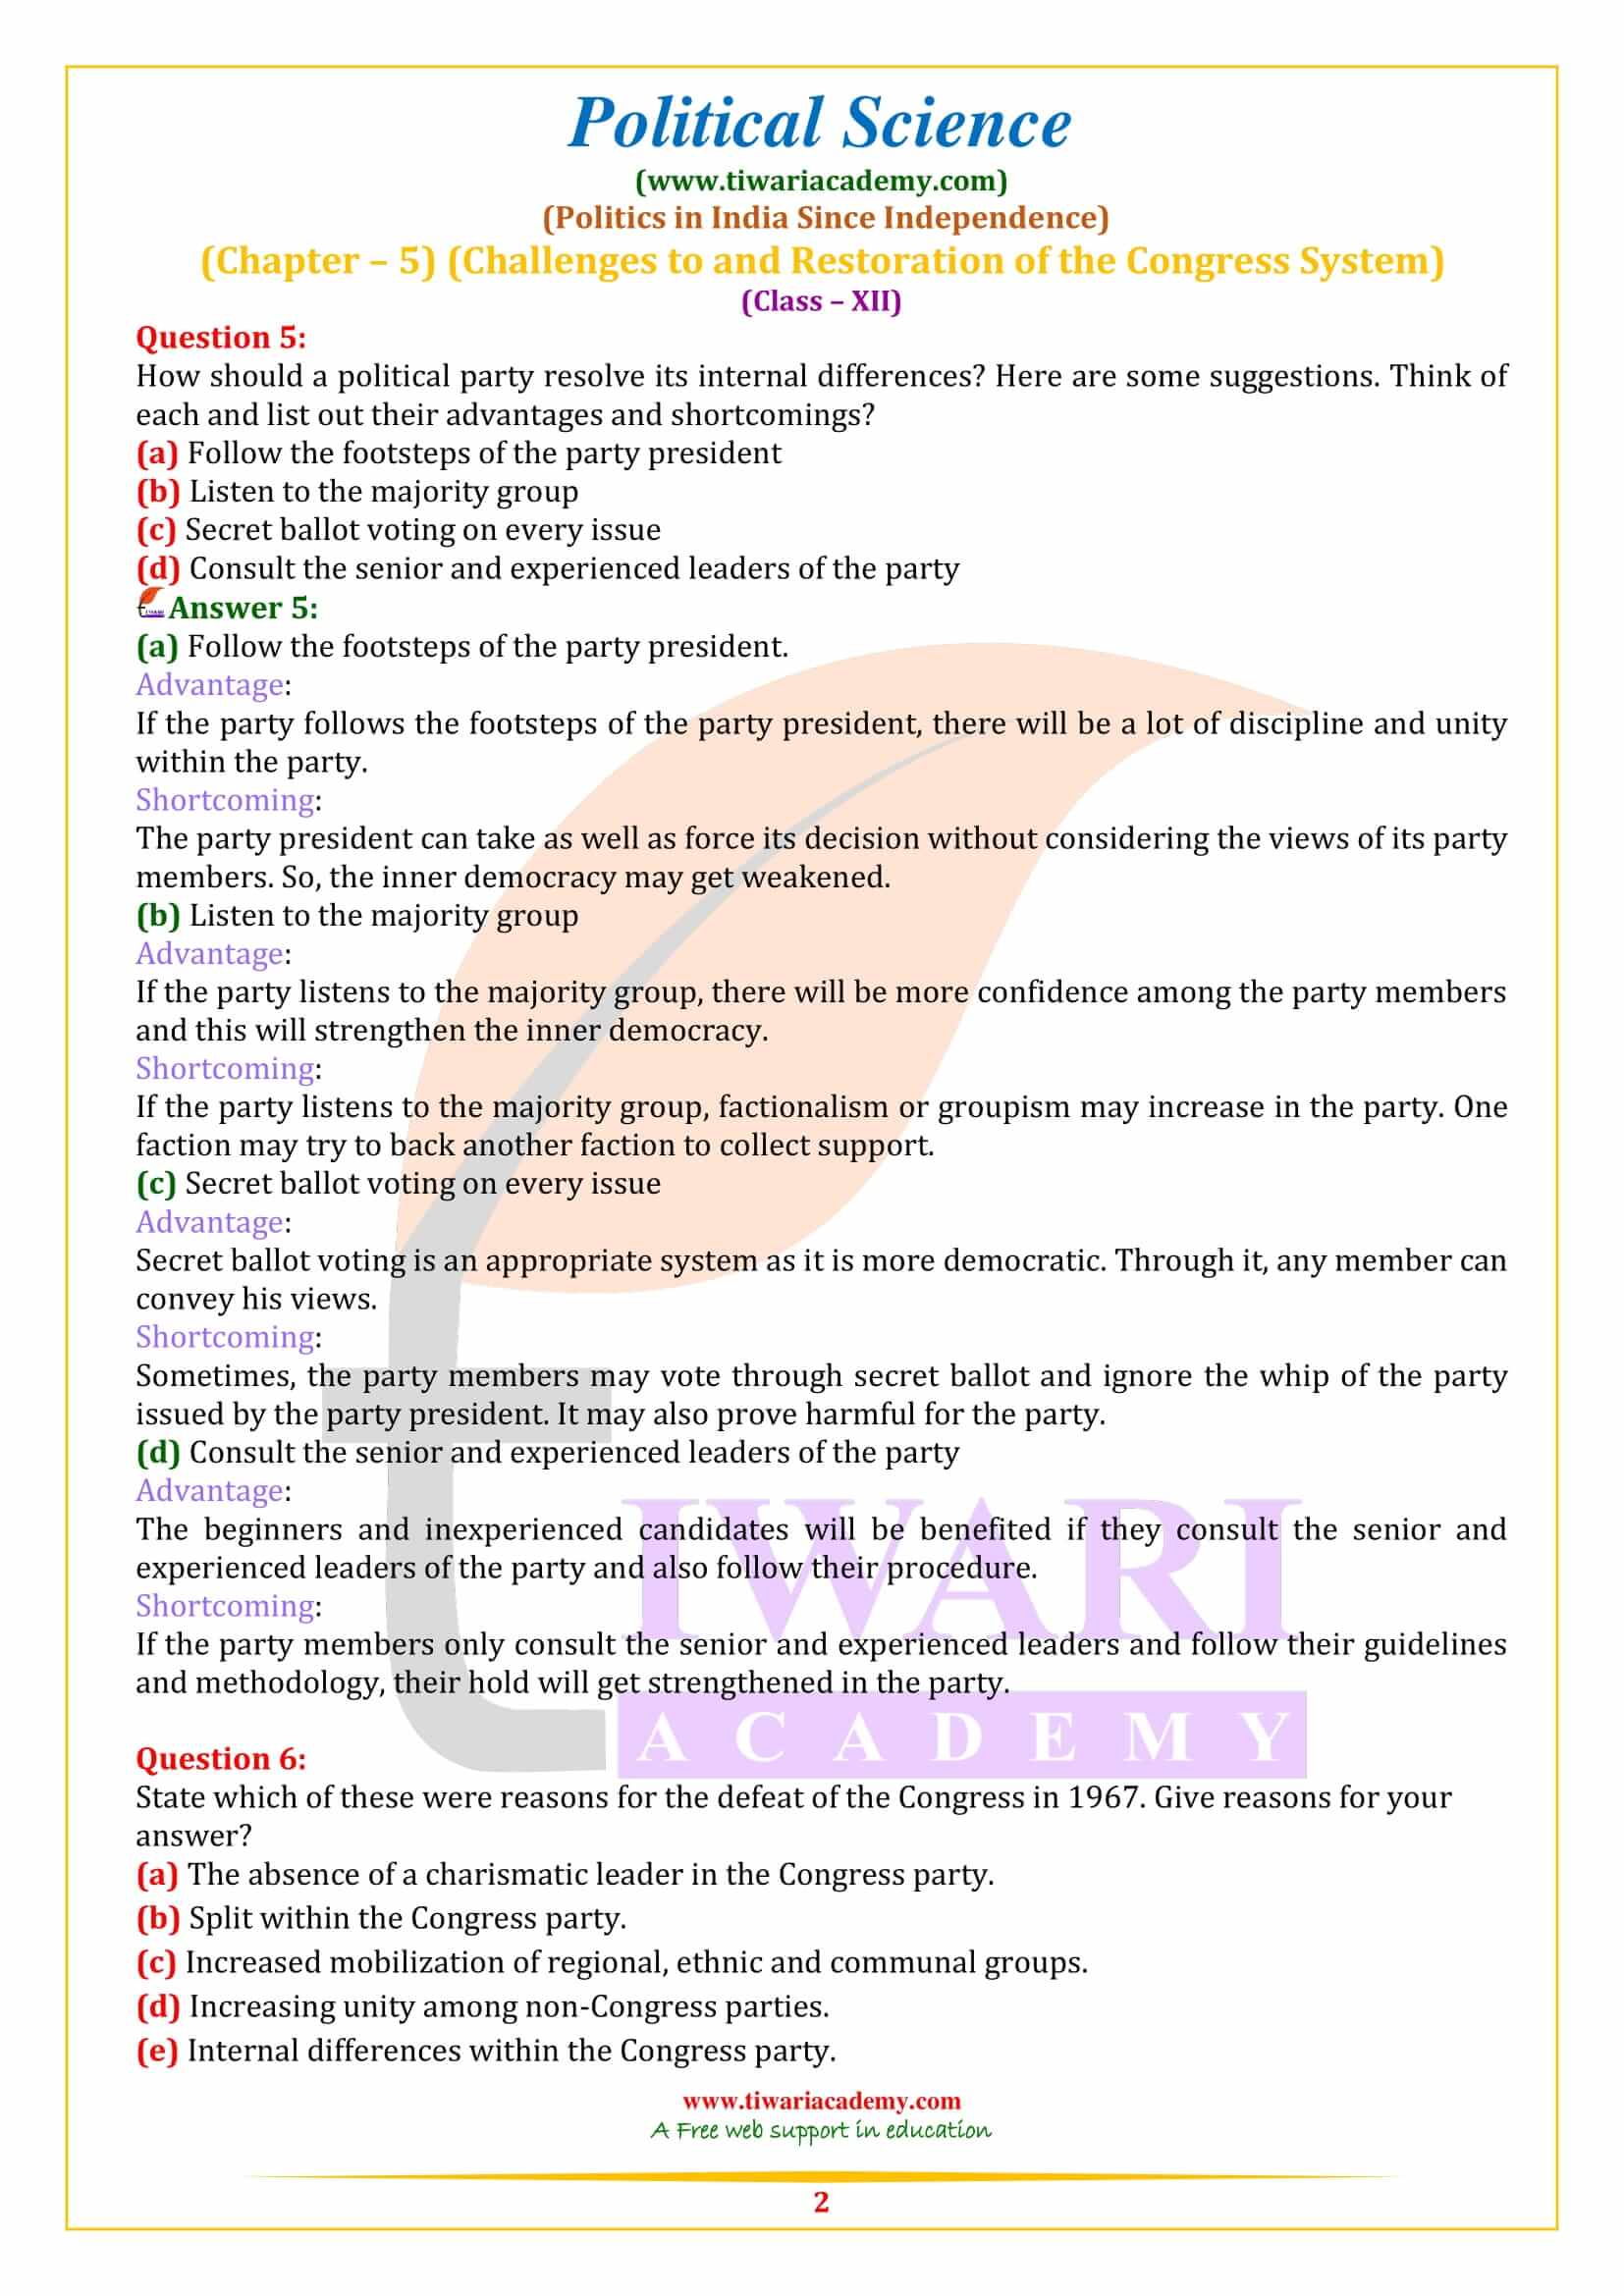 NCERT Solutions for Class 12 Political Science Part 2 Chapter 5